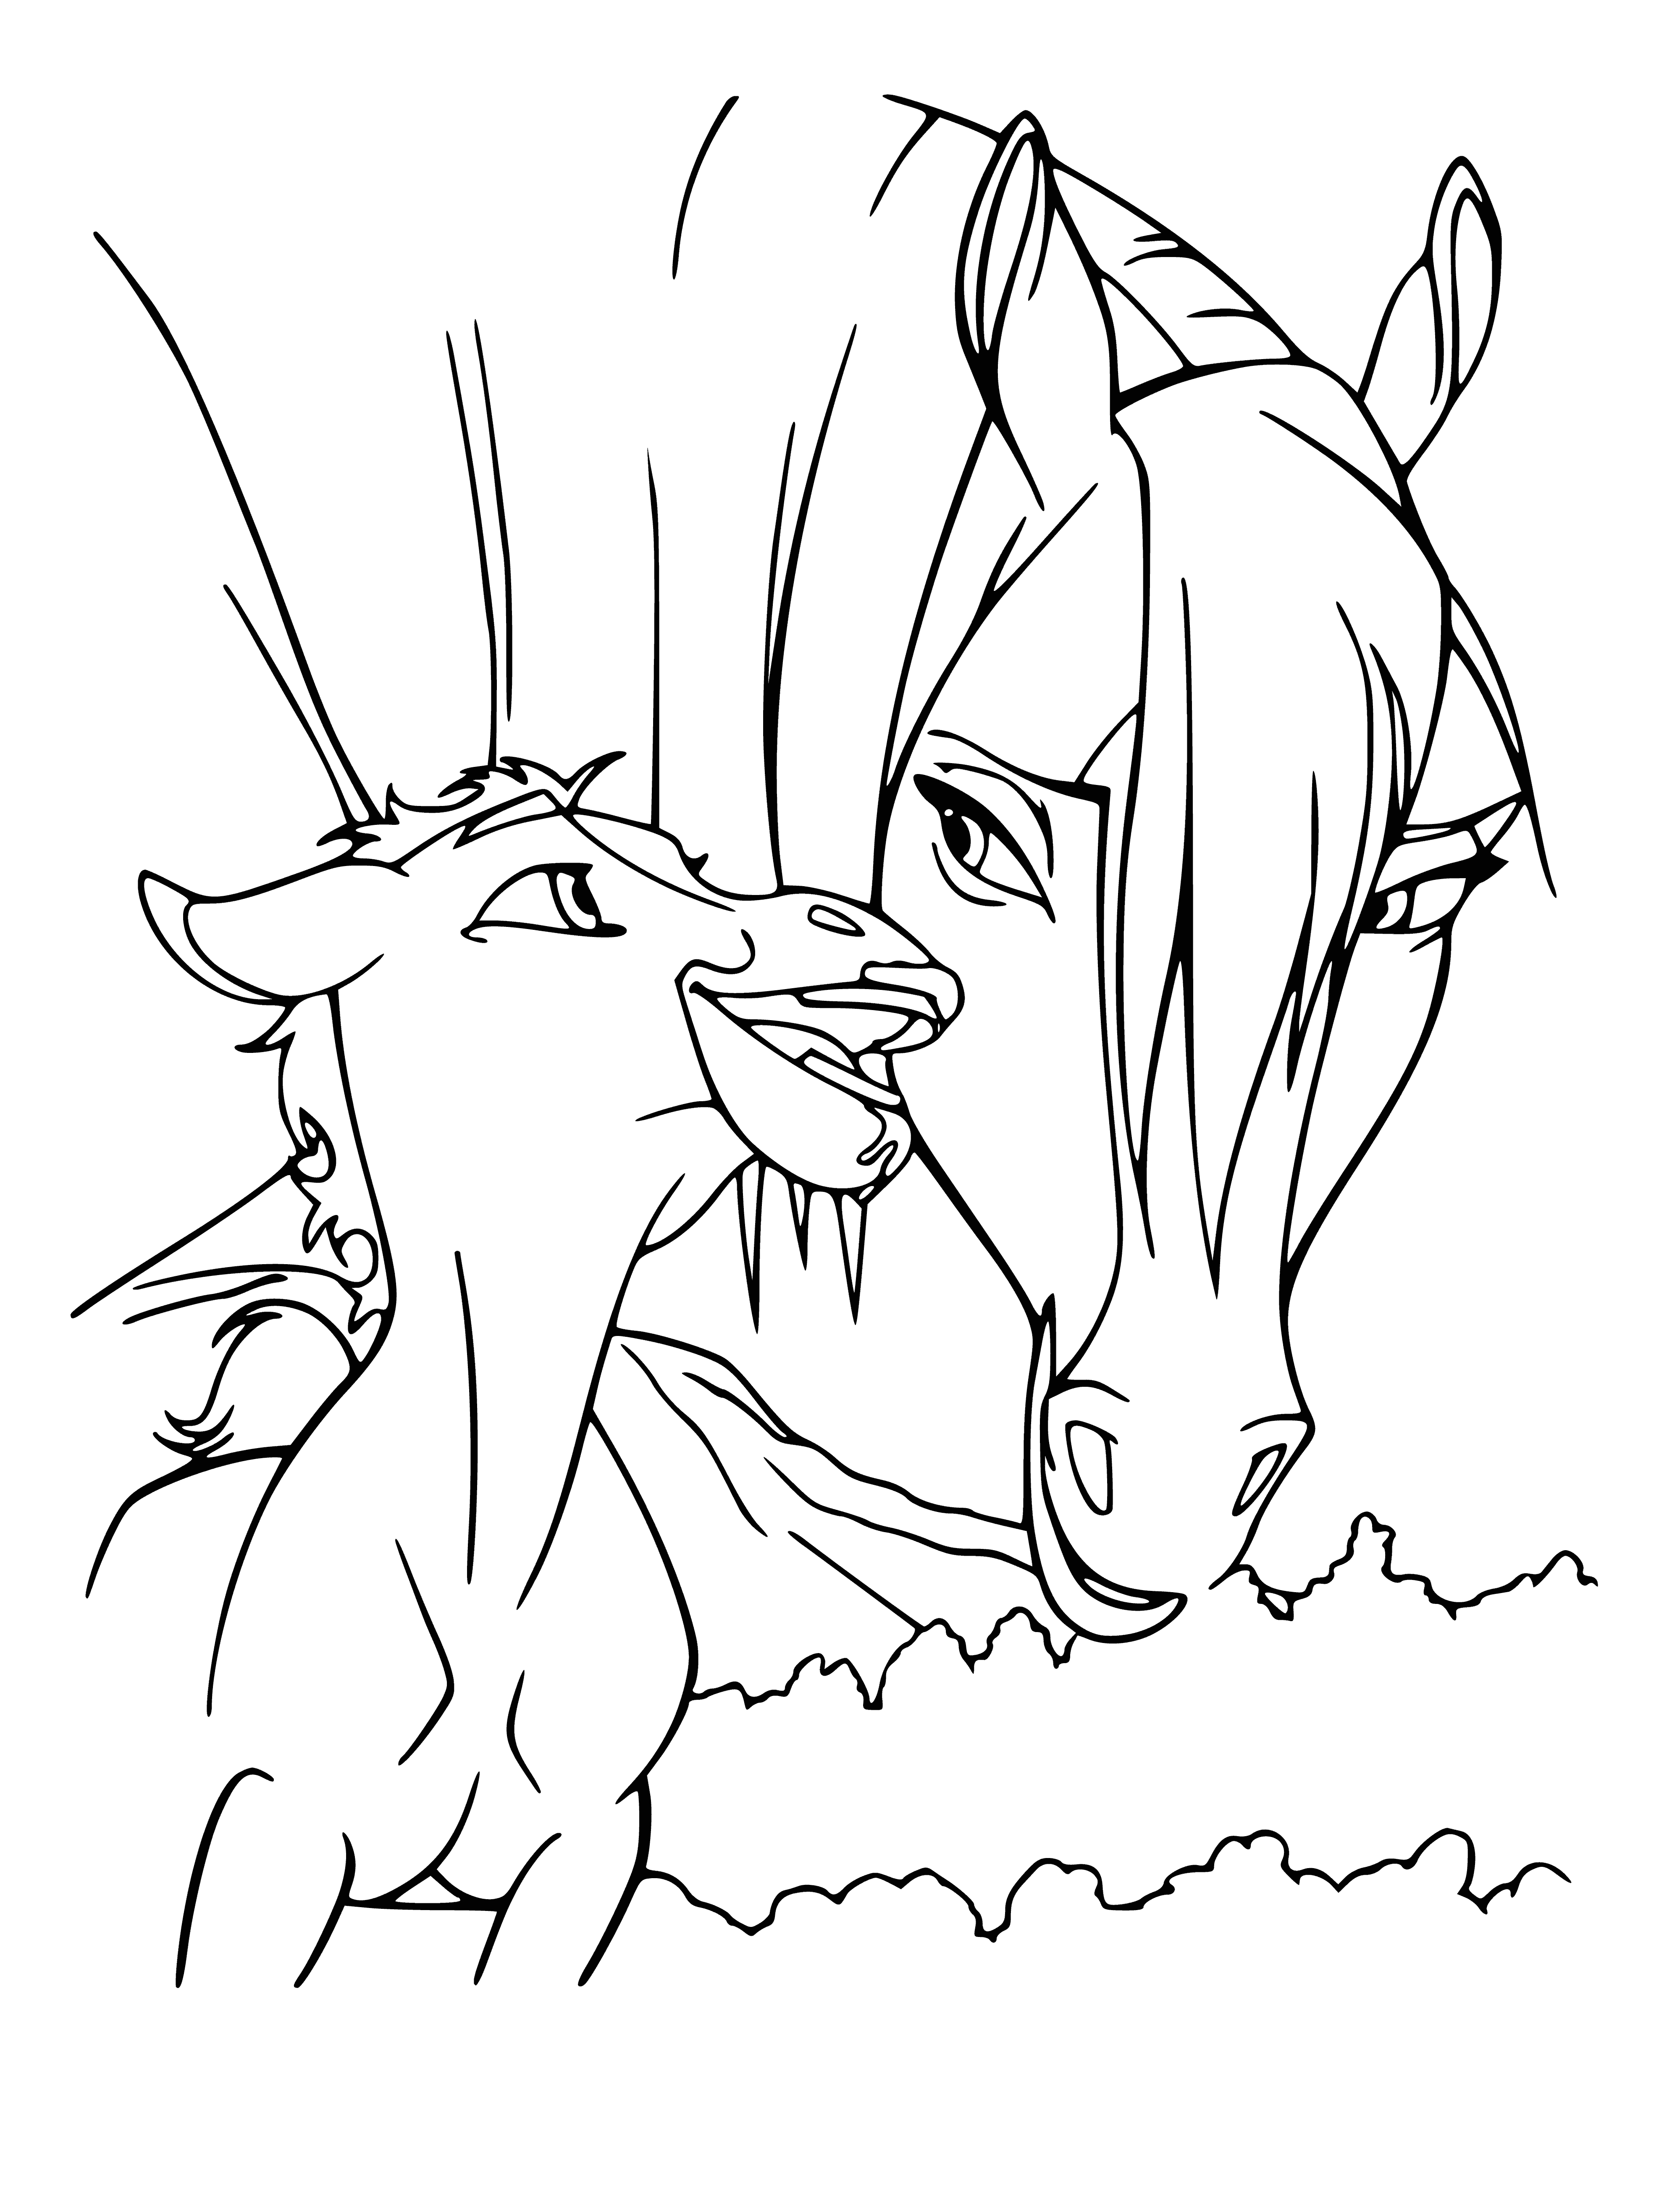 Spirit and mom coloring page